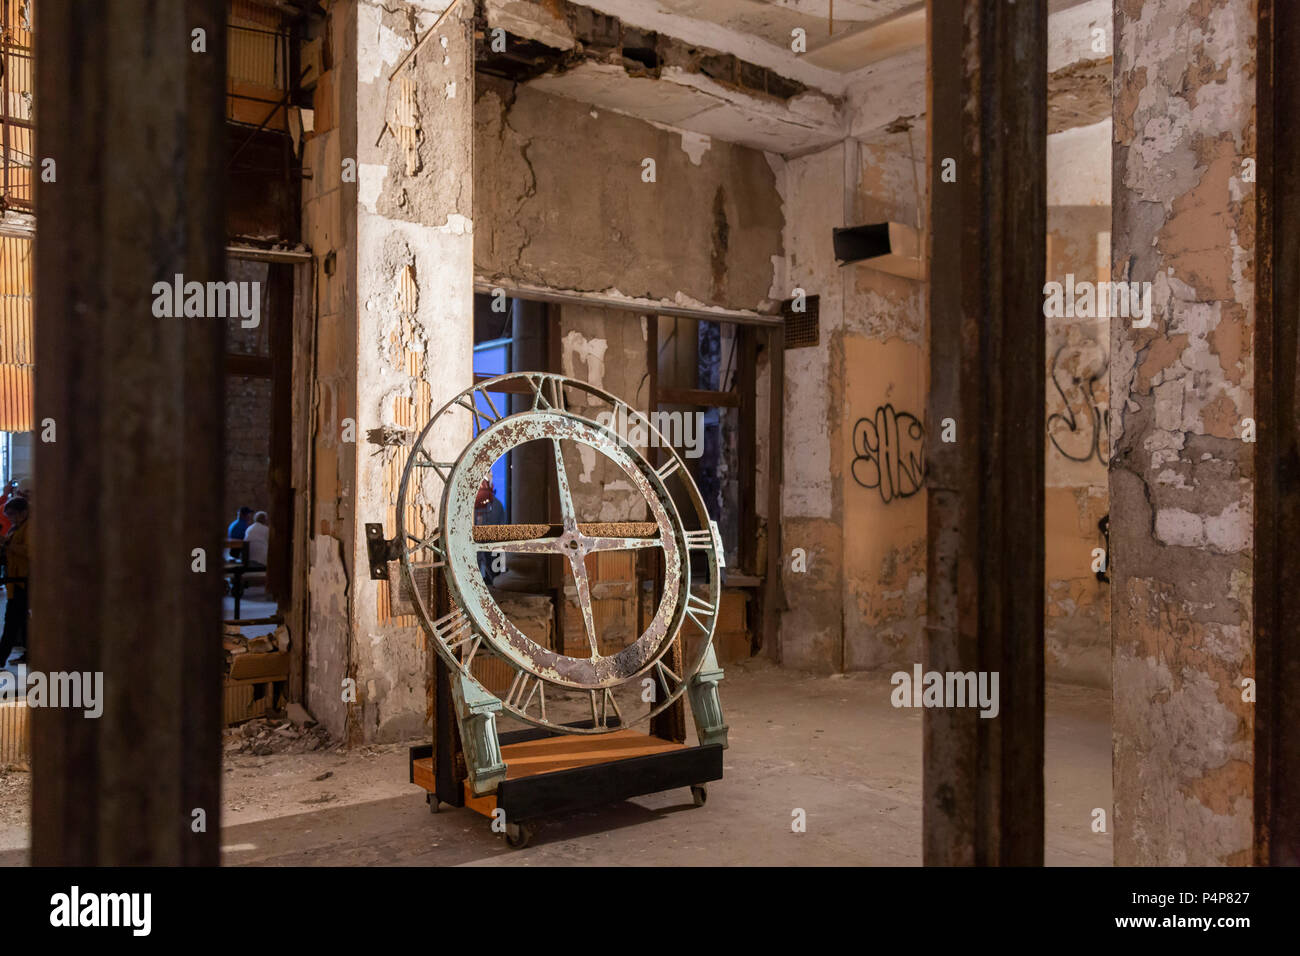 Detroit, Michigan USA - 22 June 2018 - A long-missing clock from the Michigan Central railroad station. The 100-year-old Beaux-Arts station was neglected and vandalized after the last train left in 1988. The clock was anonymously returned after the building was purchased by Ford Motor Co. Credit: Jim West/Alamy Live News Stock Photo